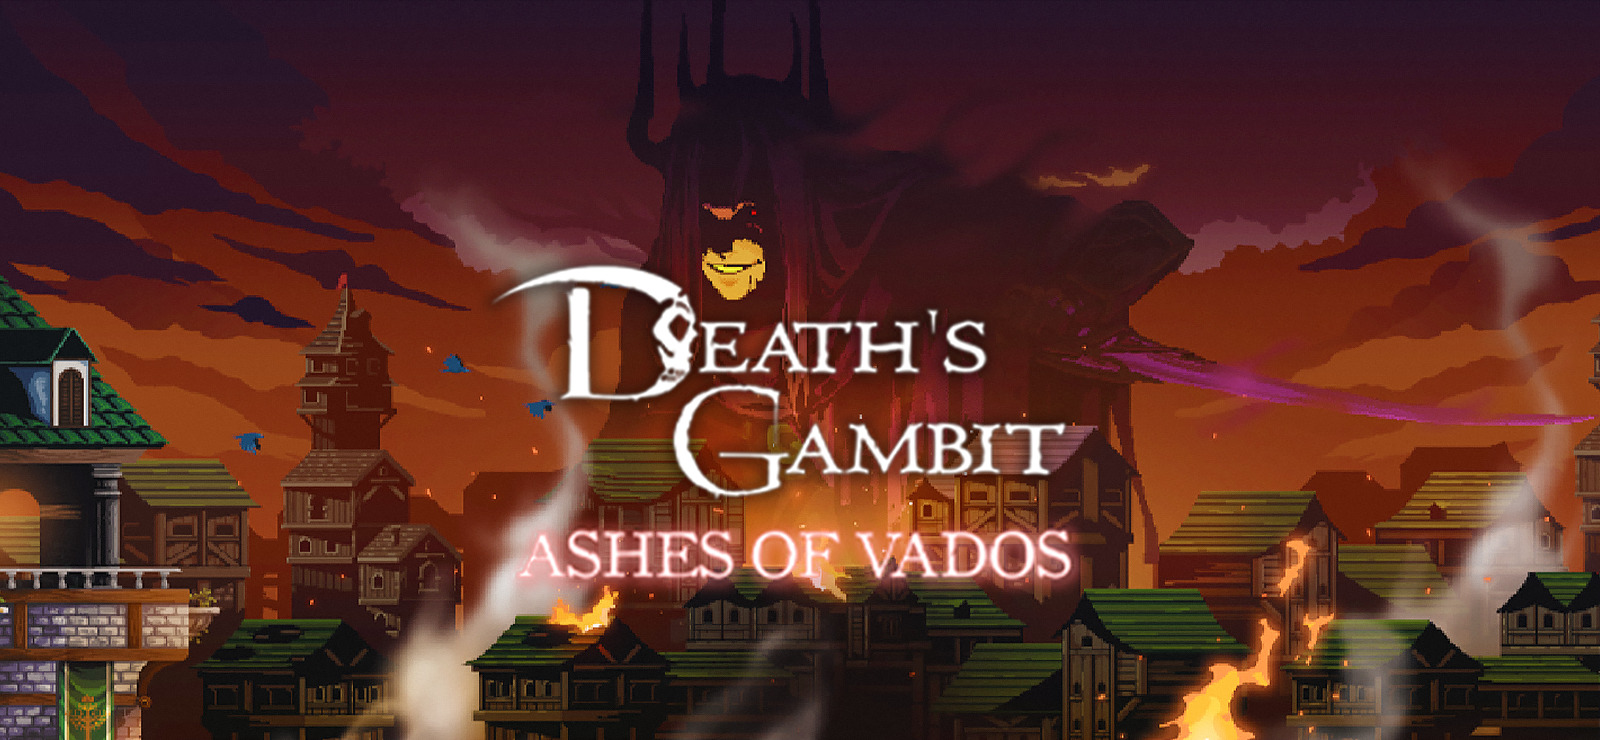 Death's Gambit: Ashes of Vados Reviews for PlayStation 4 - GameFAQs